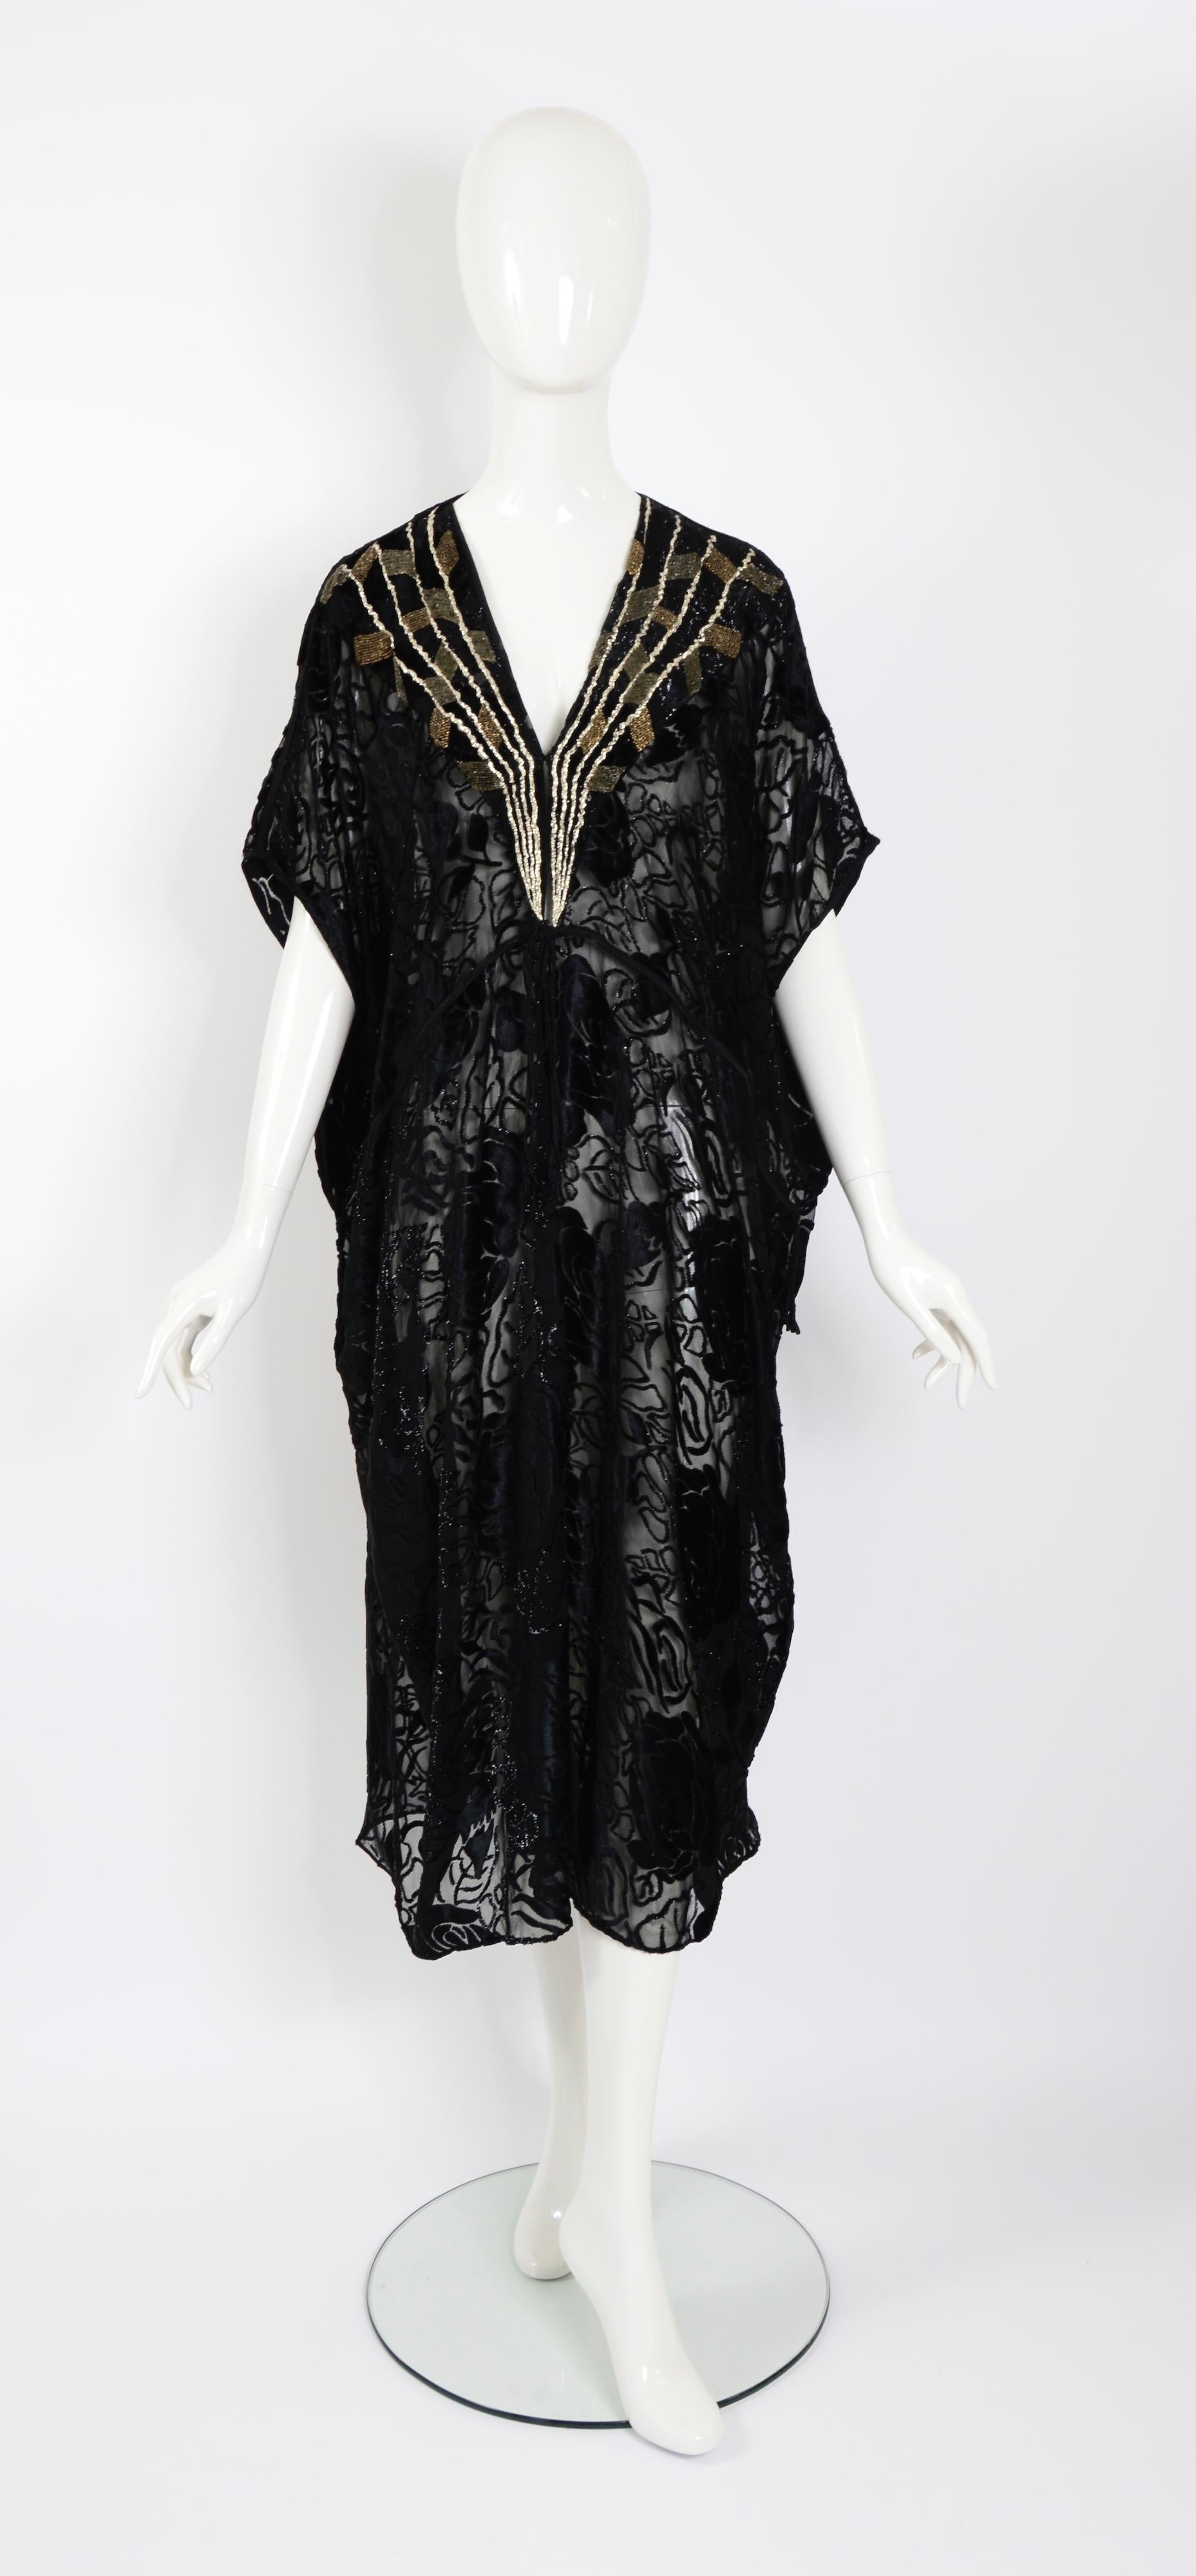 Gorgeous Thea Porter Couture Caftan. 
The caftan is primarily composed of black devoré burnout silk velvet in a floral motif. Gold and silver-tone beads run horizontally and diagonally between the stripes. The caftan-like gown has multiple black